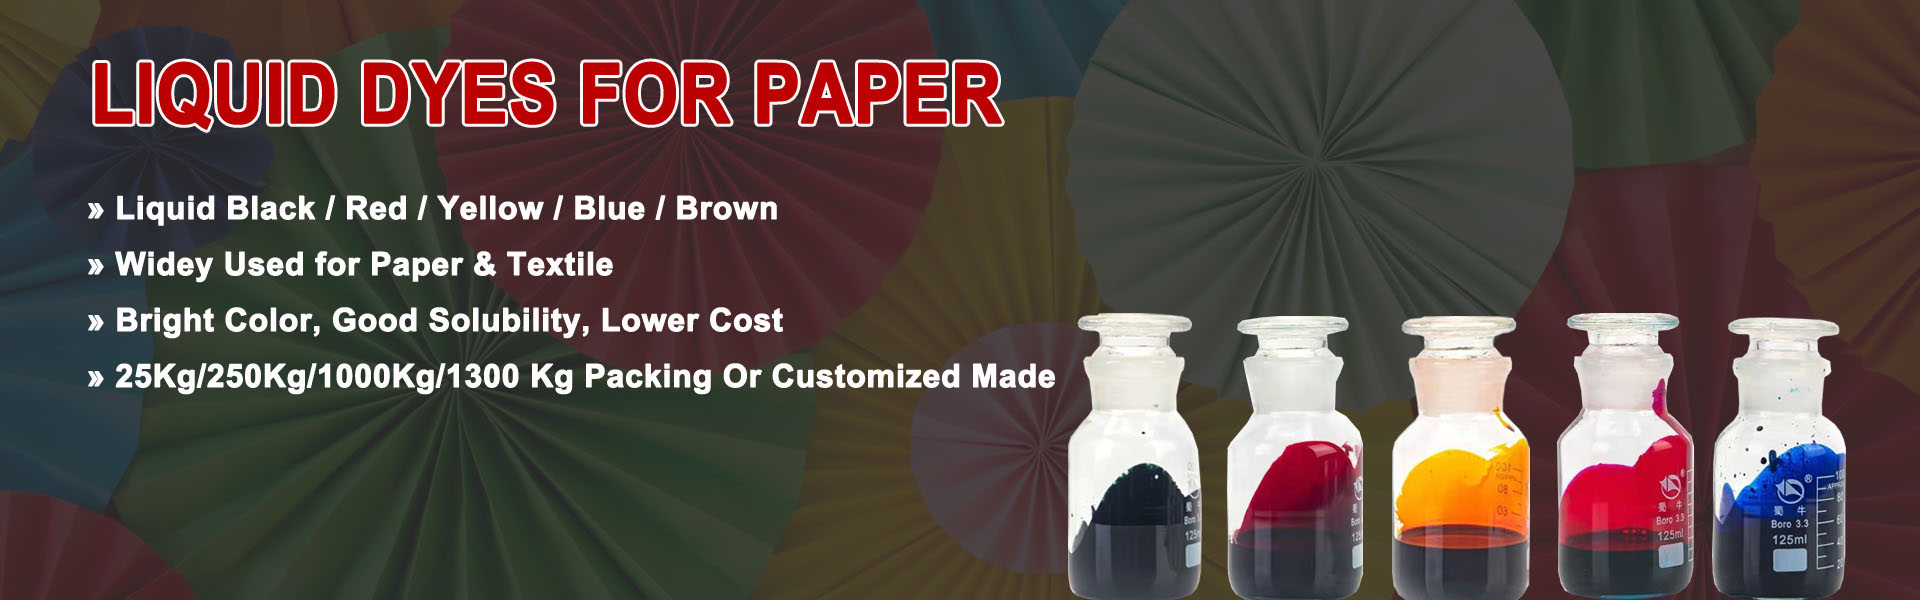 liquid dyes for paper